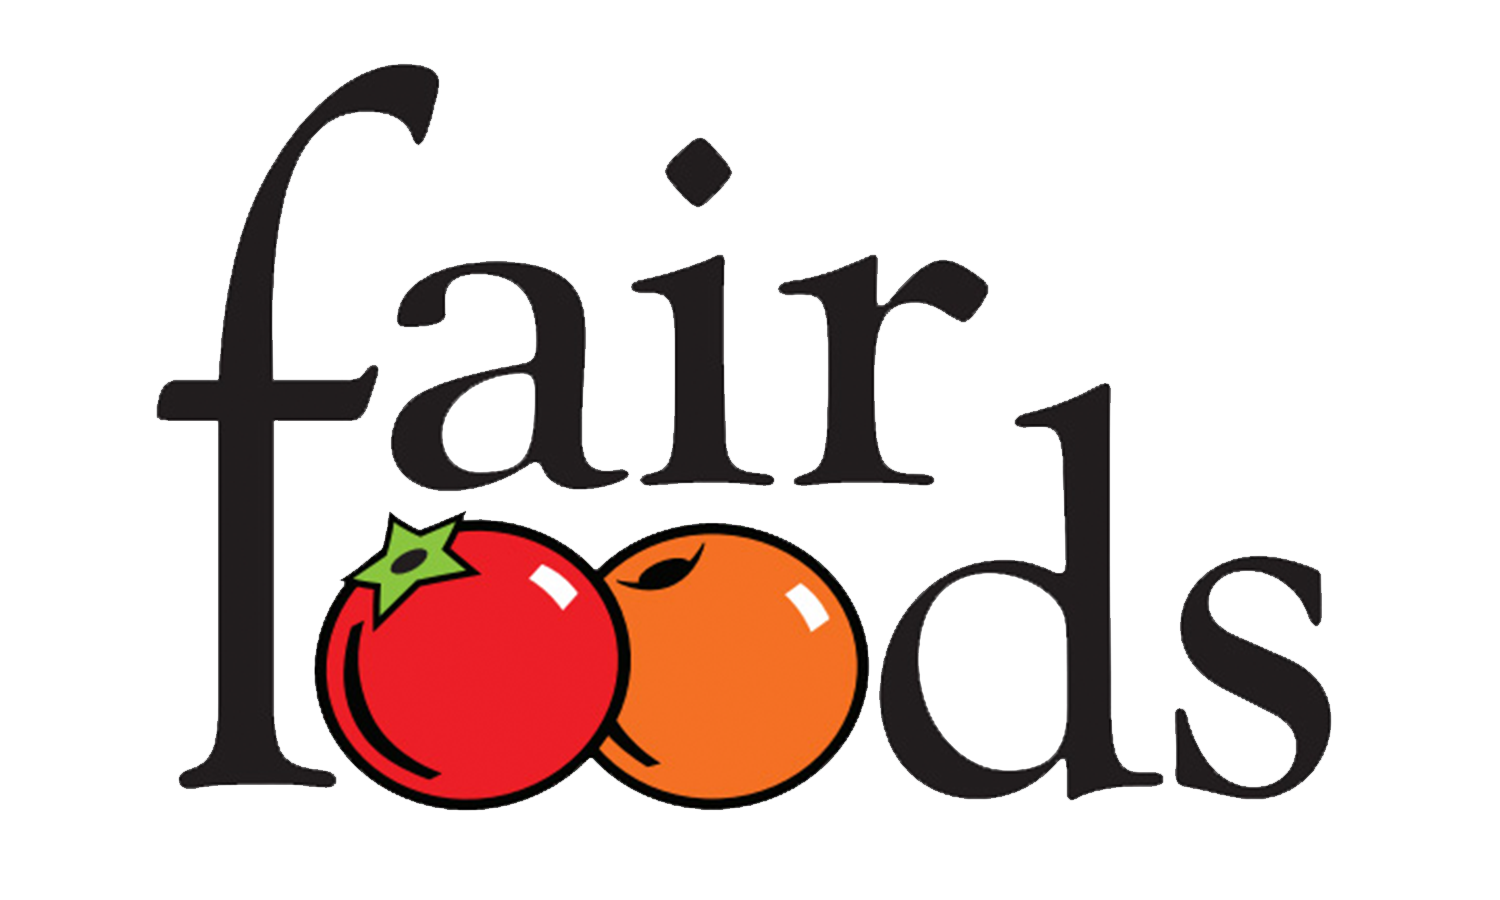 A black background with the words fair foods written in it.